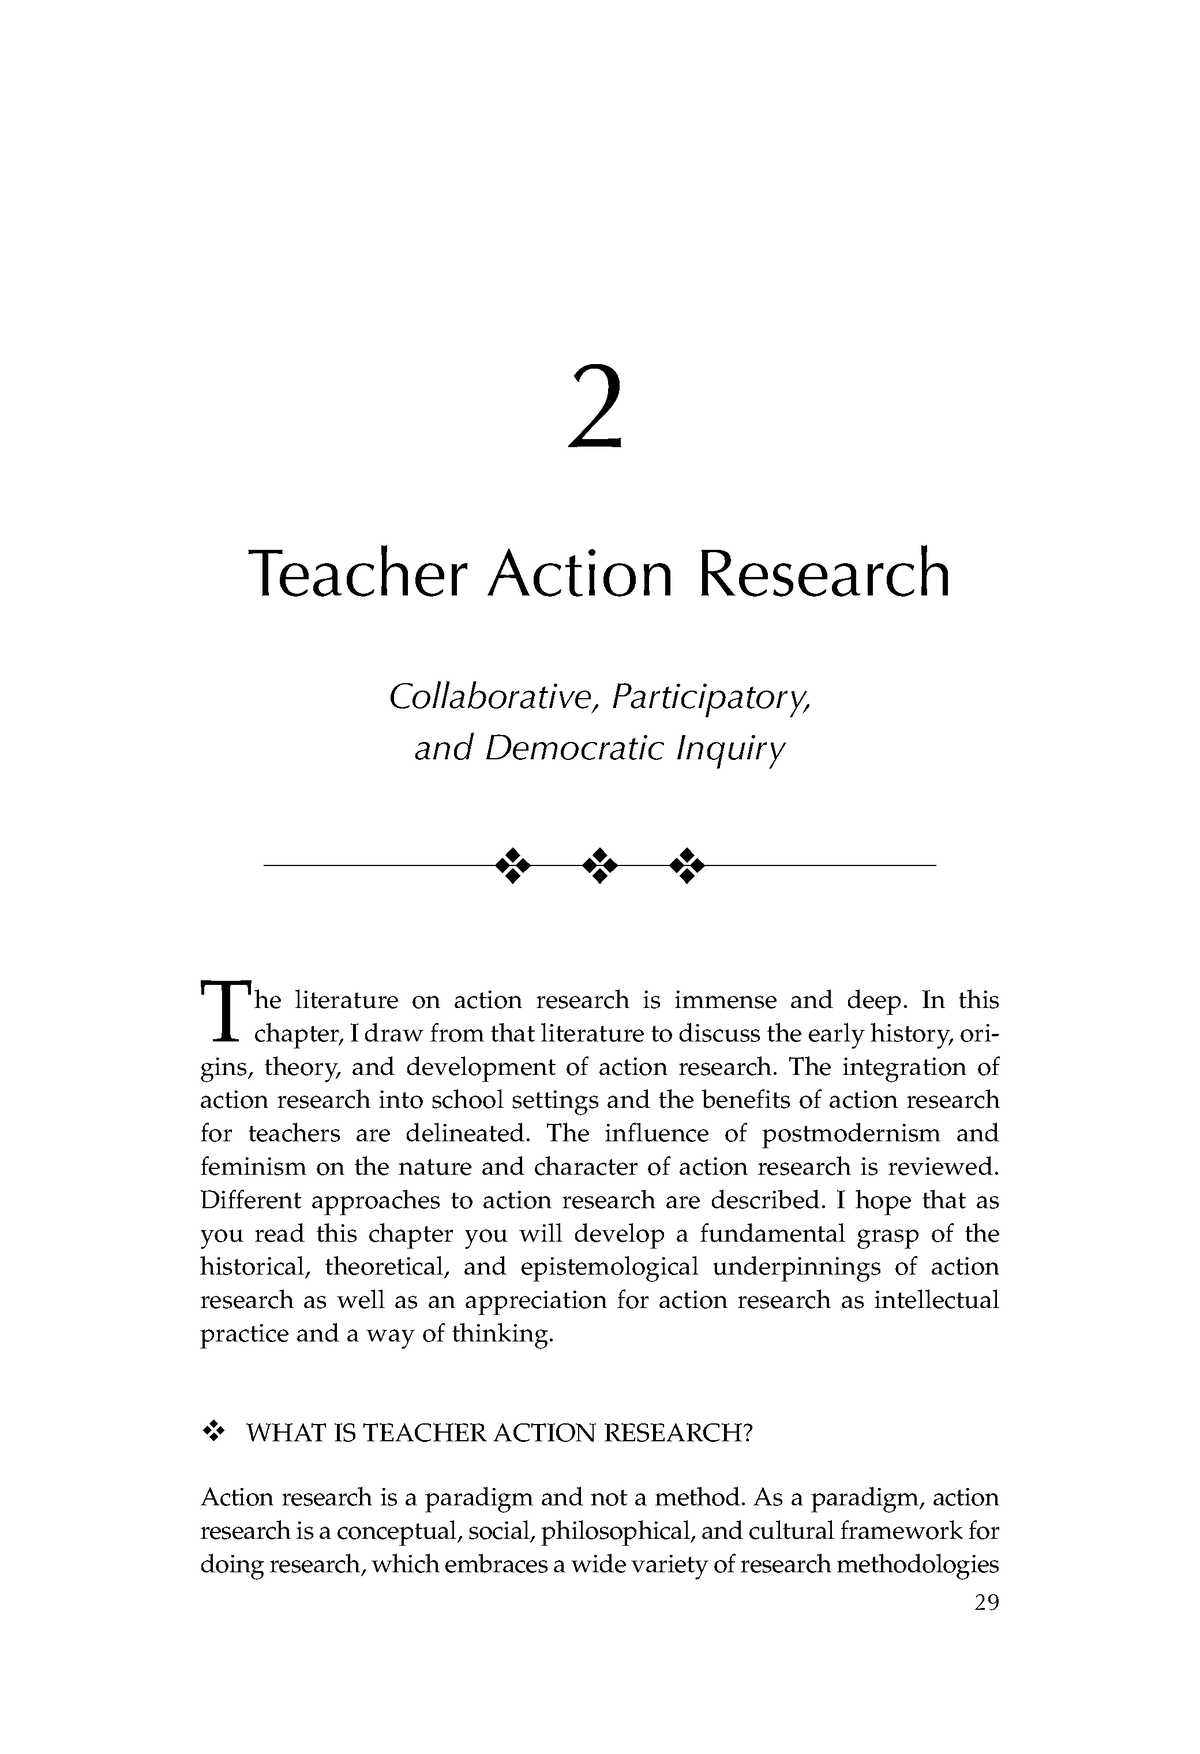 thesis on participatory action research